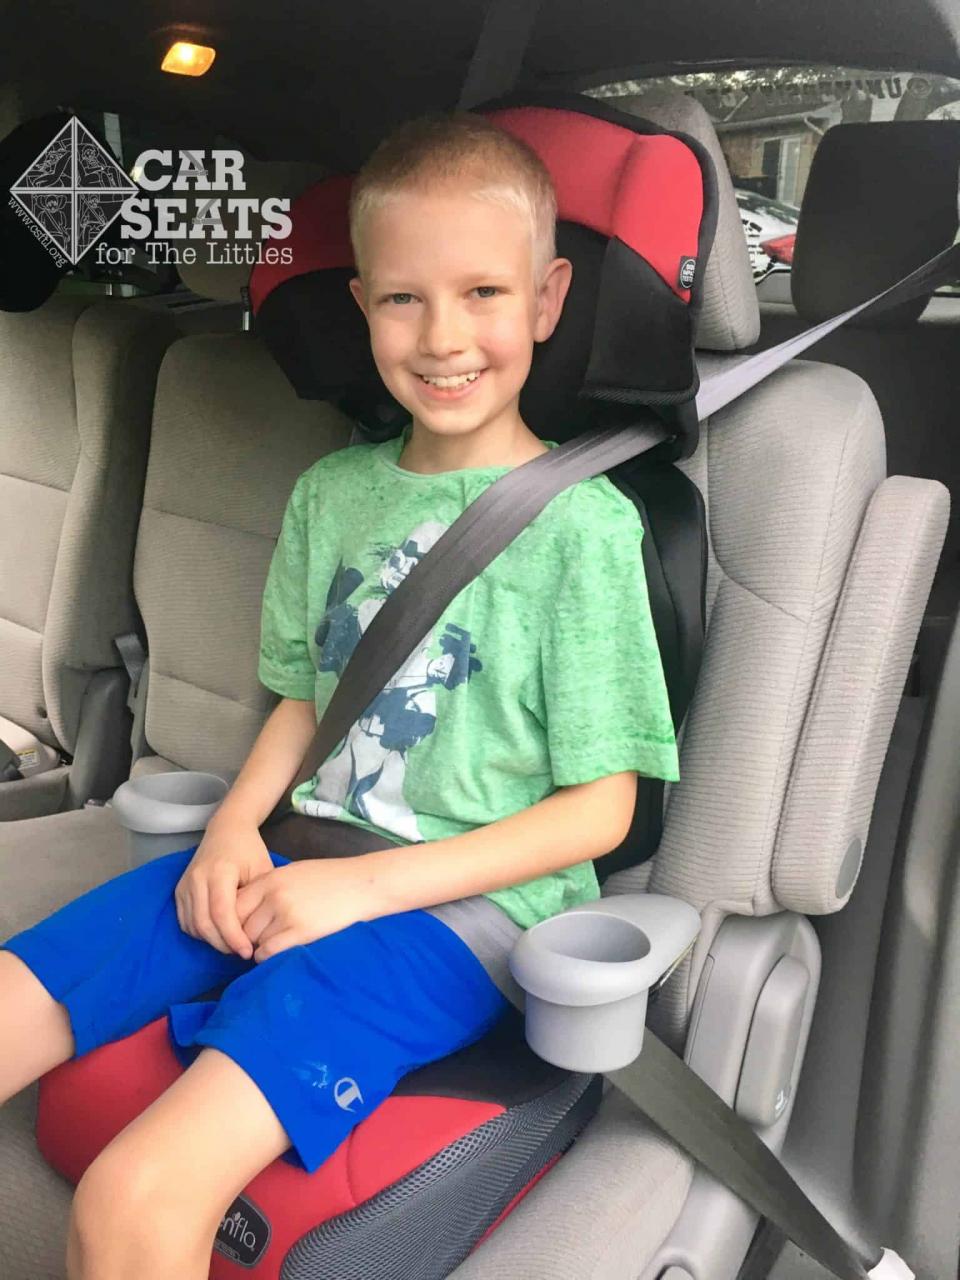 Evenflo Big Kid Sport Review - Car Seats For The Littles